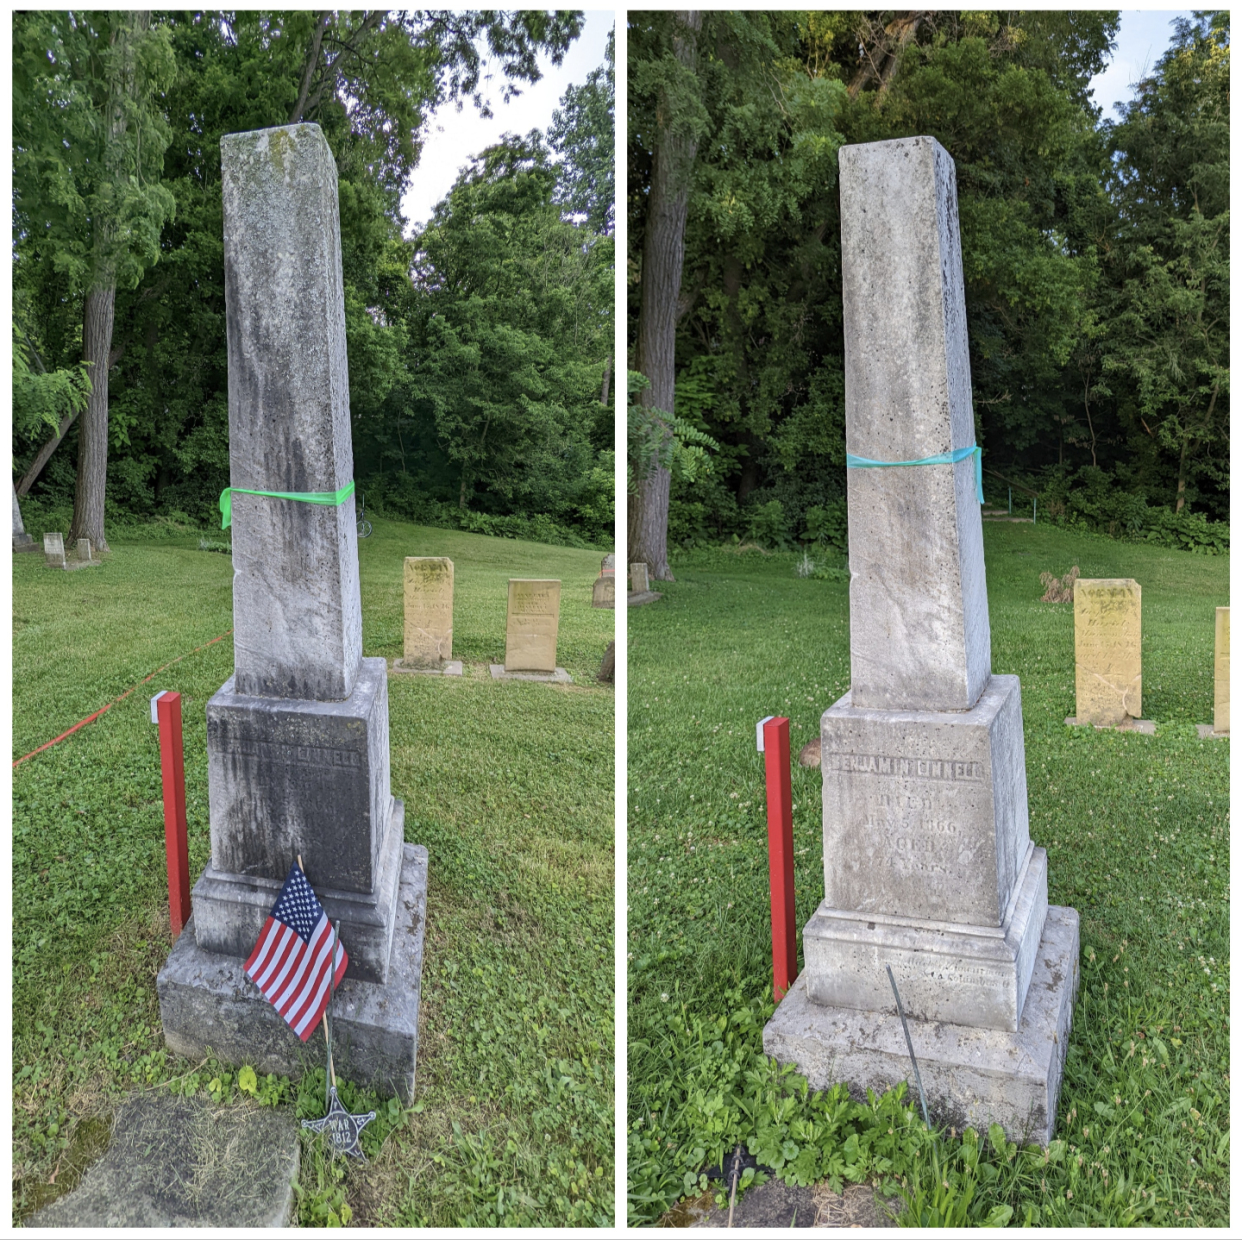 The 1866 marble monument in Granville’s Old Colony Burying Ground, shown in "before-and-after” shots, was cleaned in 2022 by volunteer Tasia Savage. It marks the grave of Benjamin Linnell, a member of one of that Village’s founding families.